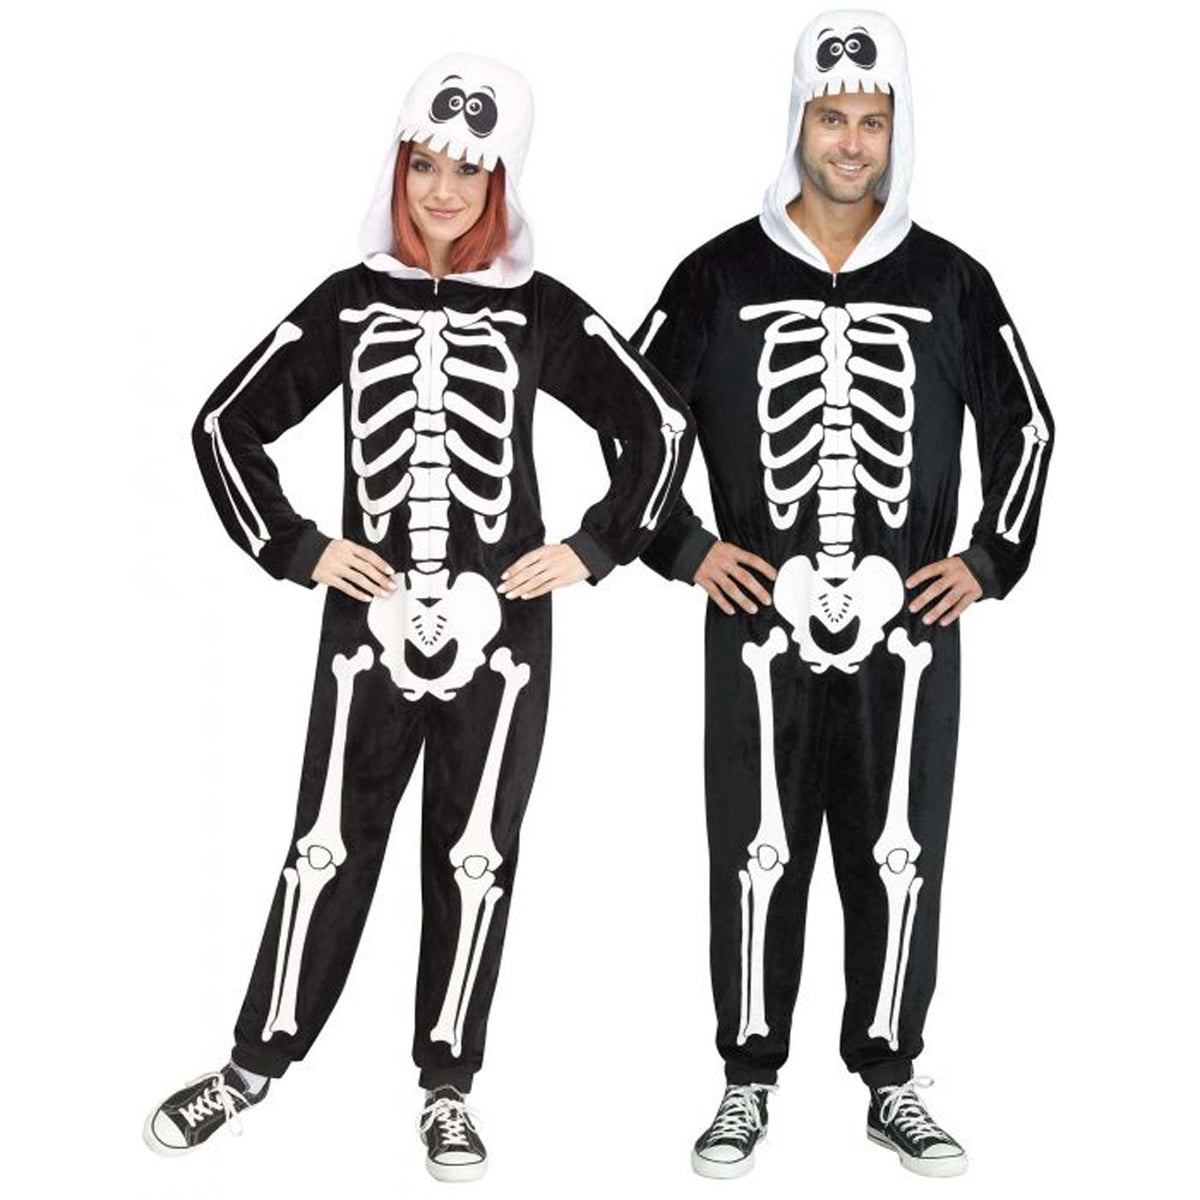 FUN WORLD Costumes Skeleton Squad Zipster Costume for Adults, Black and White Hooded Jumpsuit